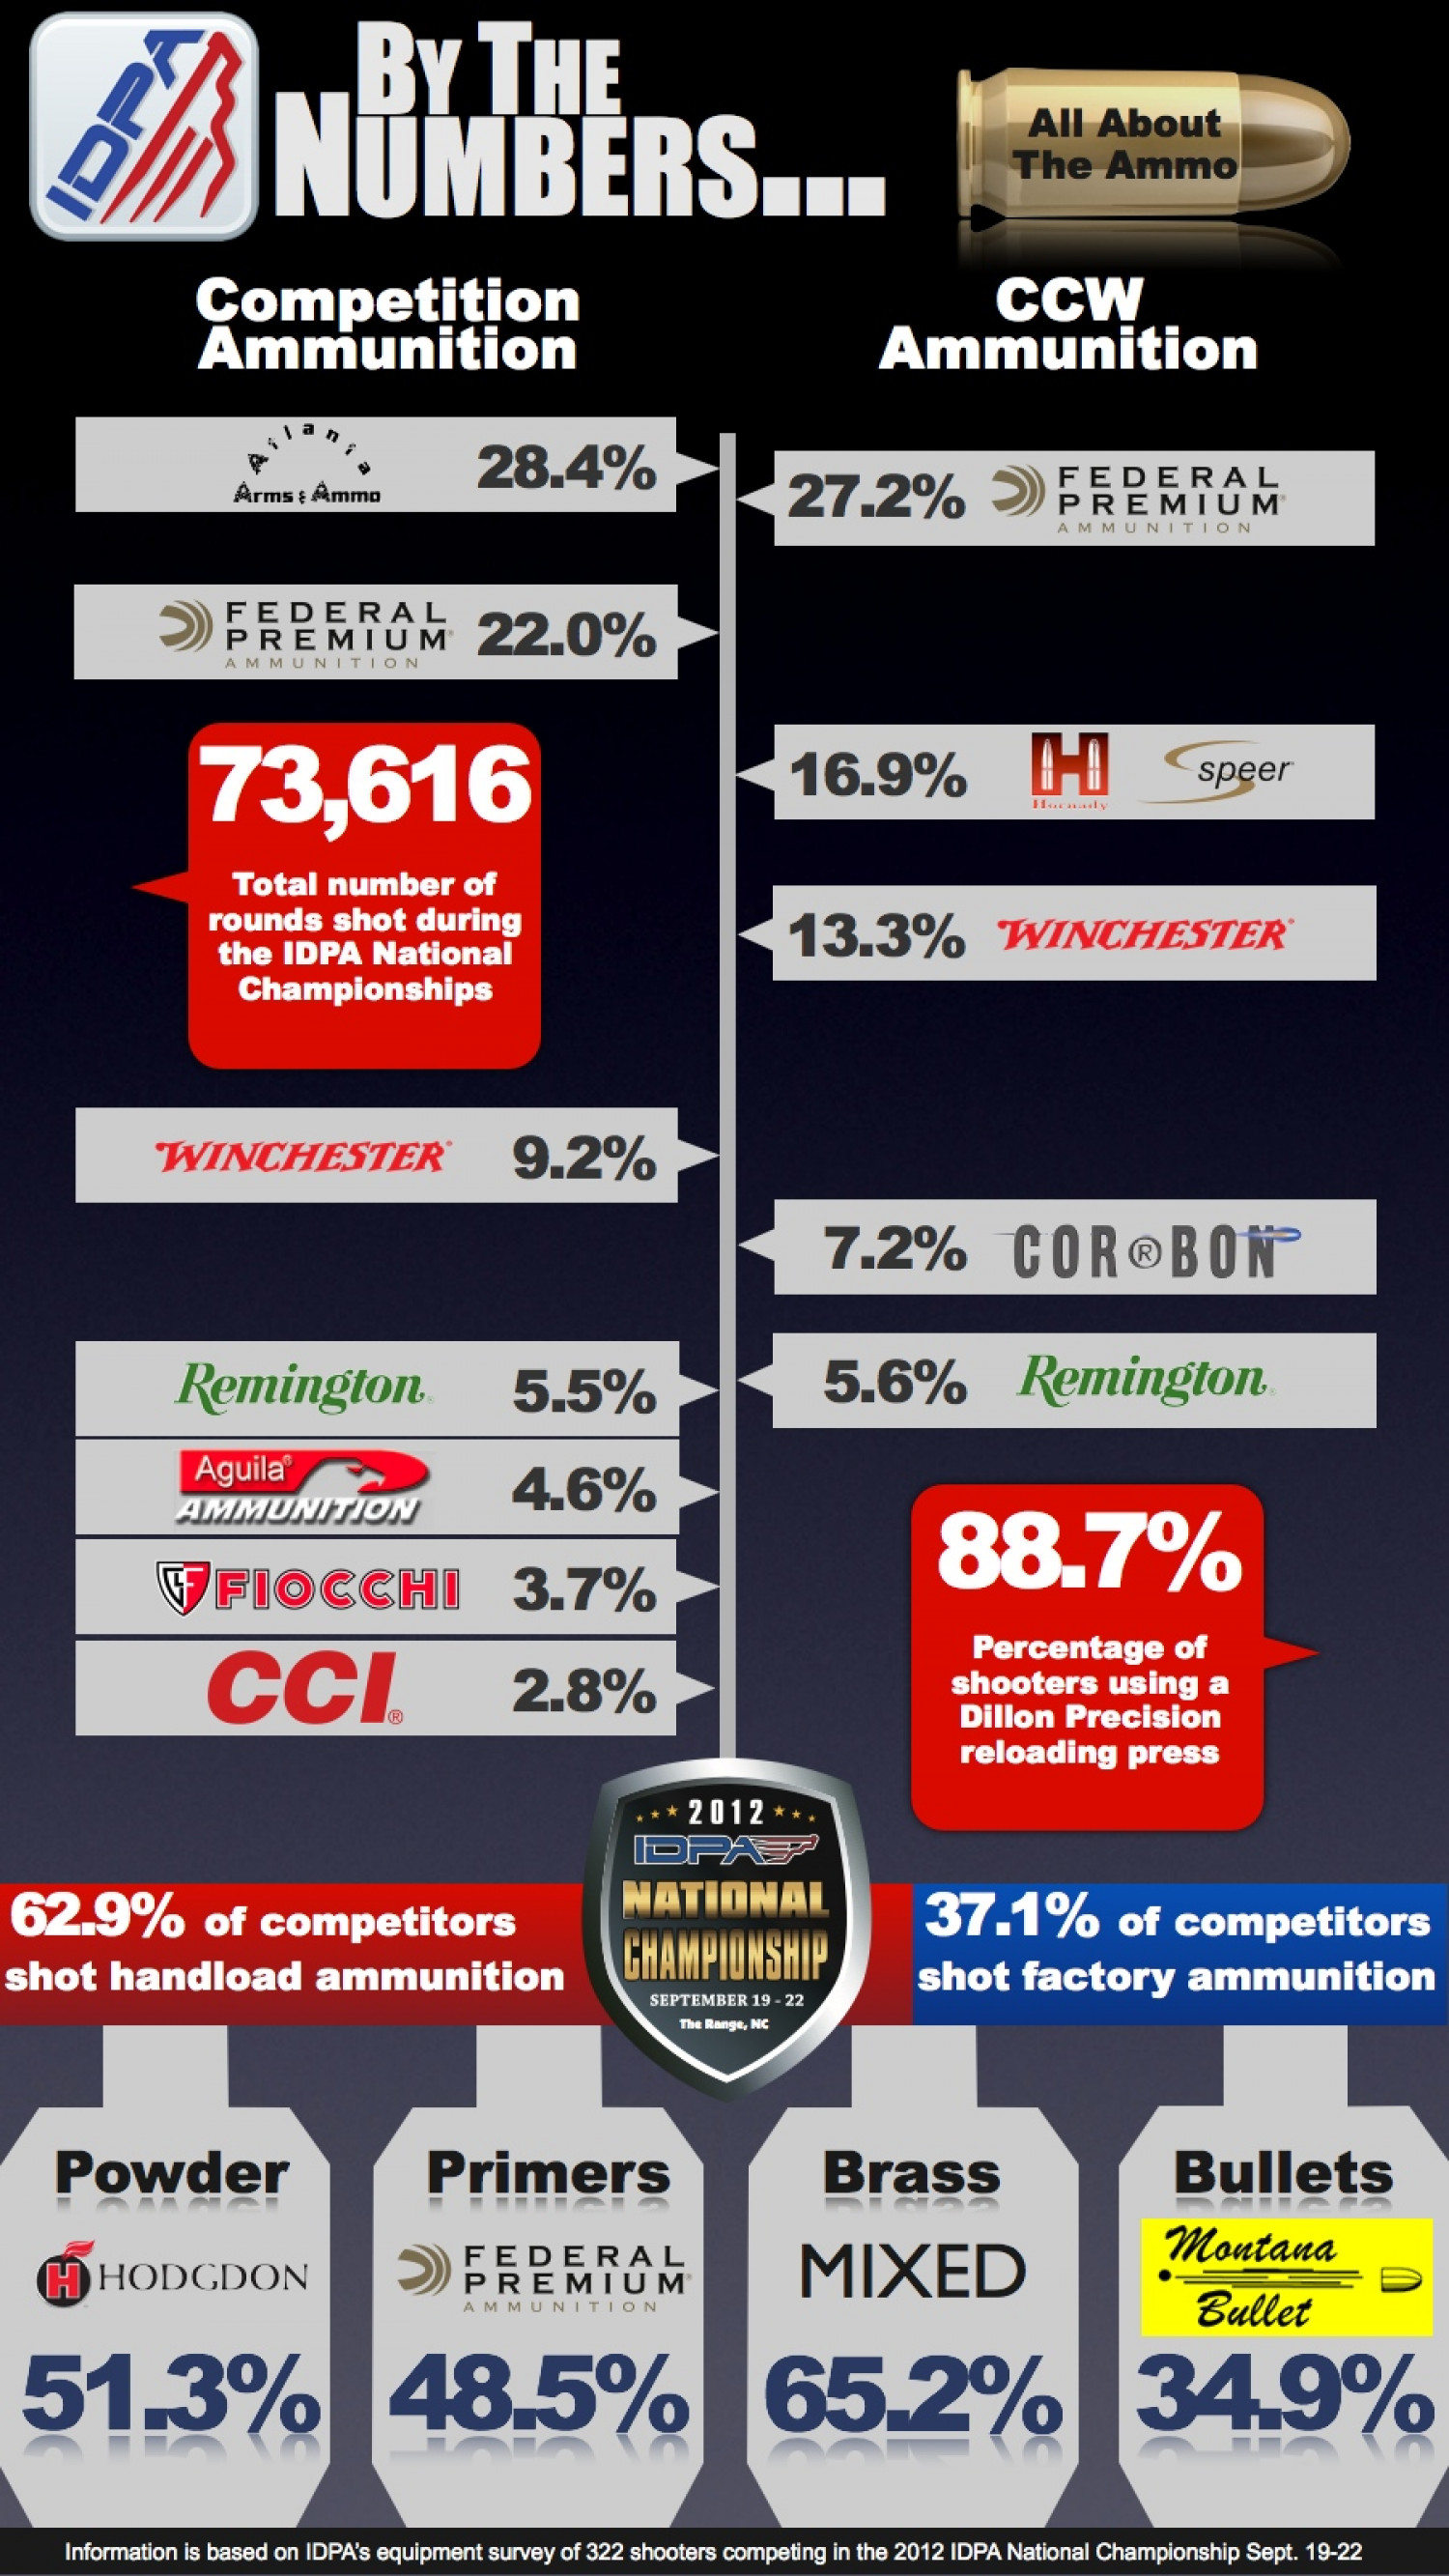 Ammo and Component Brands of the 2012 IDPA National Championship Infographic